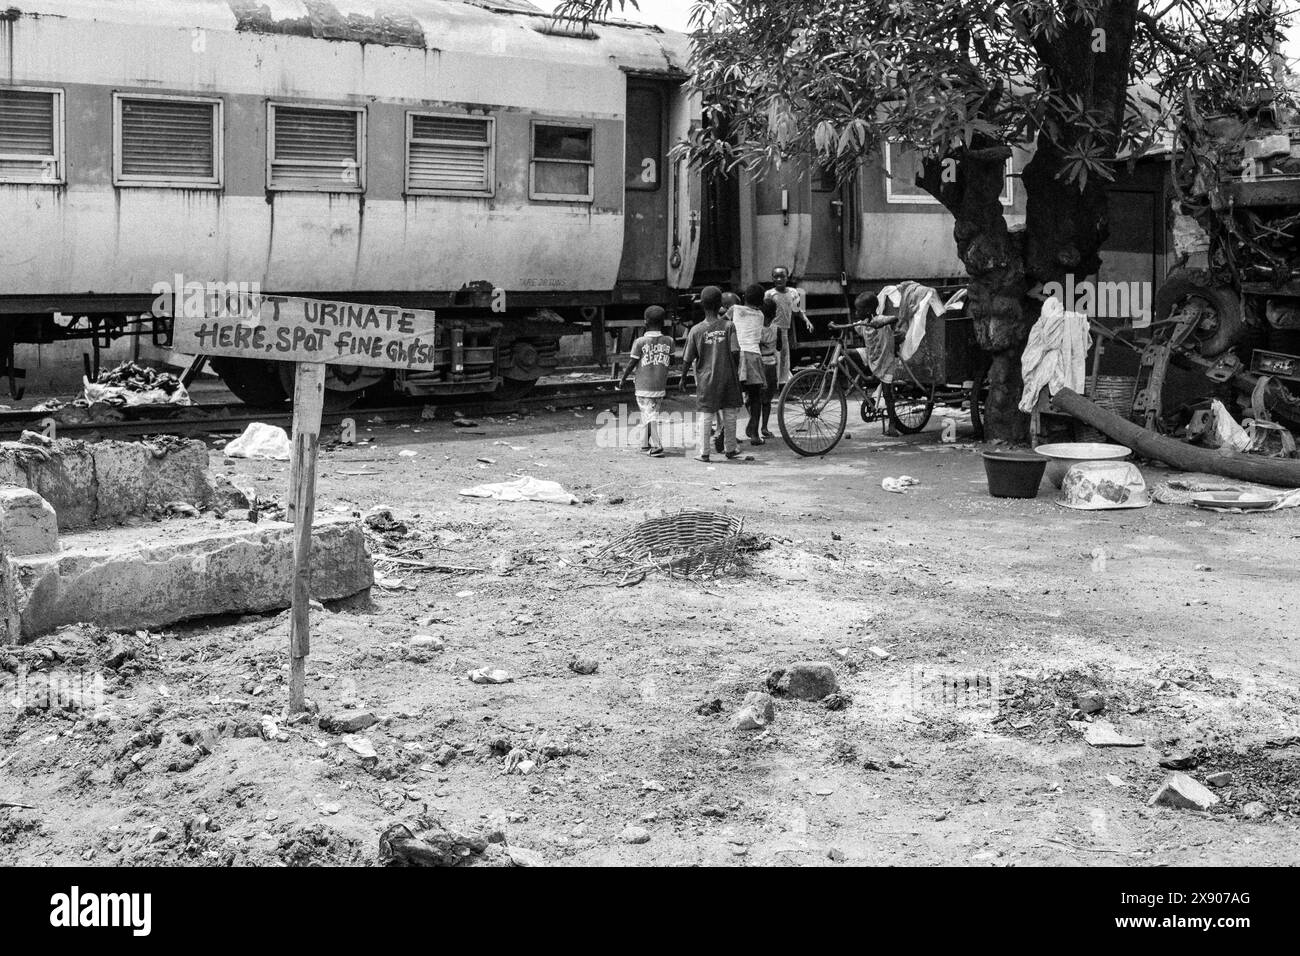 Group of children playing near an old train carriage with a 'Don't Urinate Here, Spot Fine GHS50' sign in a market area in Accra, Ghana Stock Photo